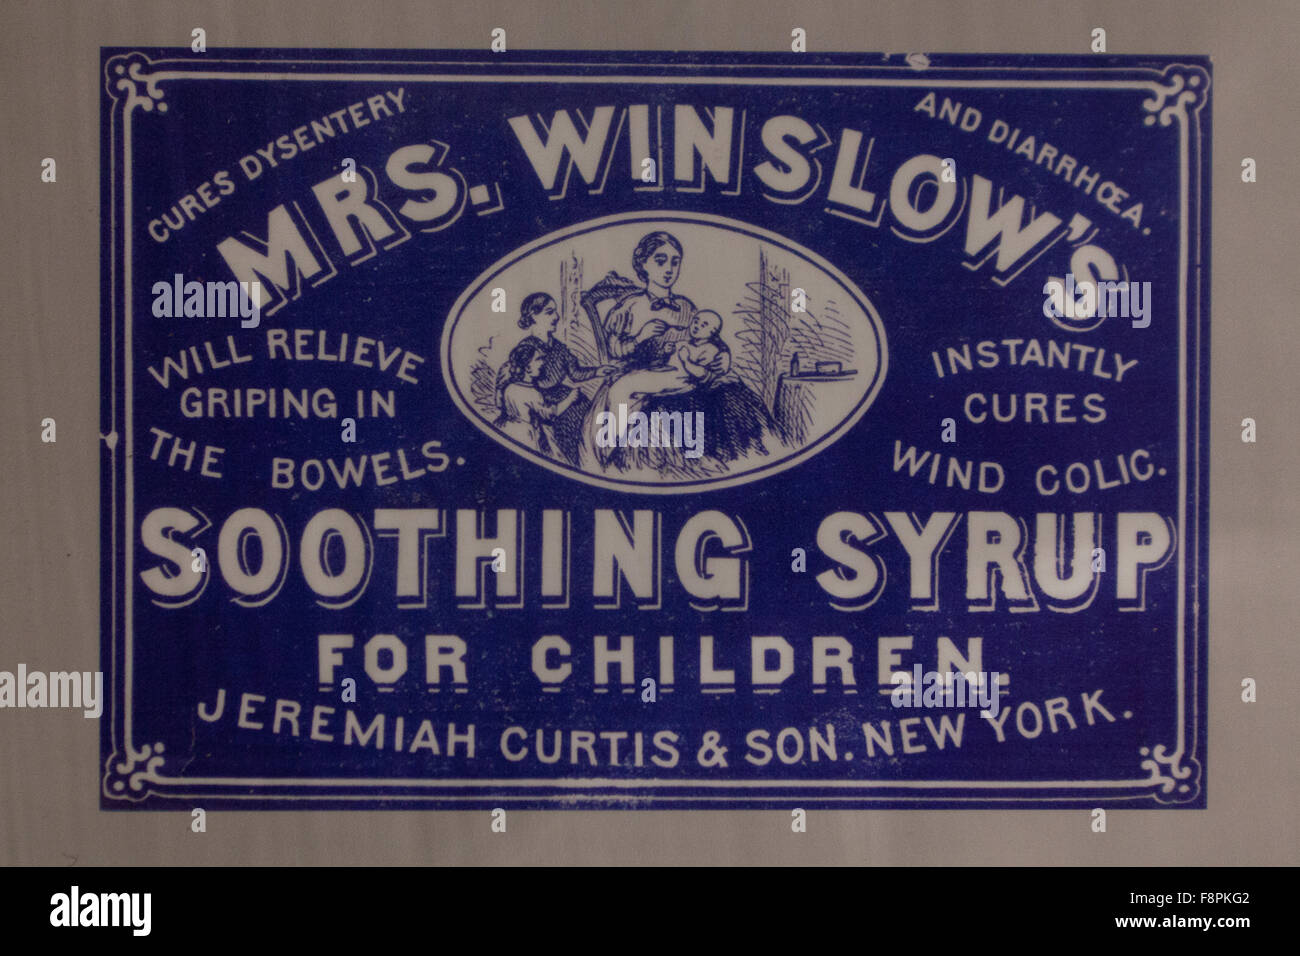 Mrs. Winslow's Soothing Syrup for Children label, circa 1900 - DEA museum, Arlington, Virginia USA Stock Photo